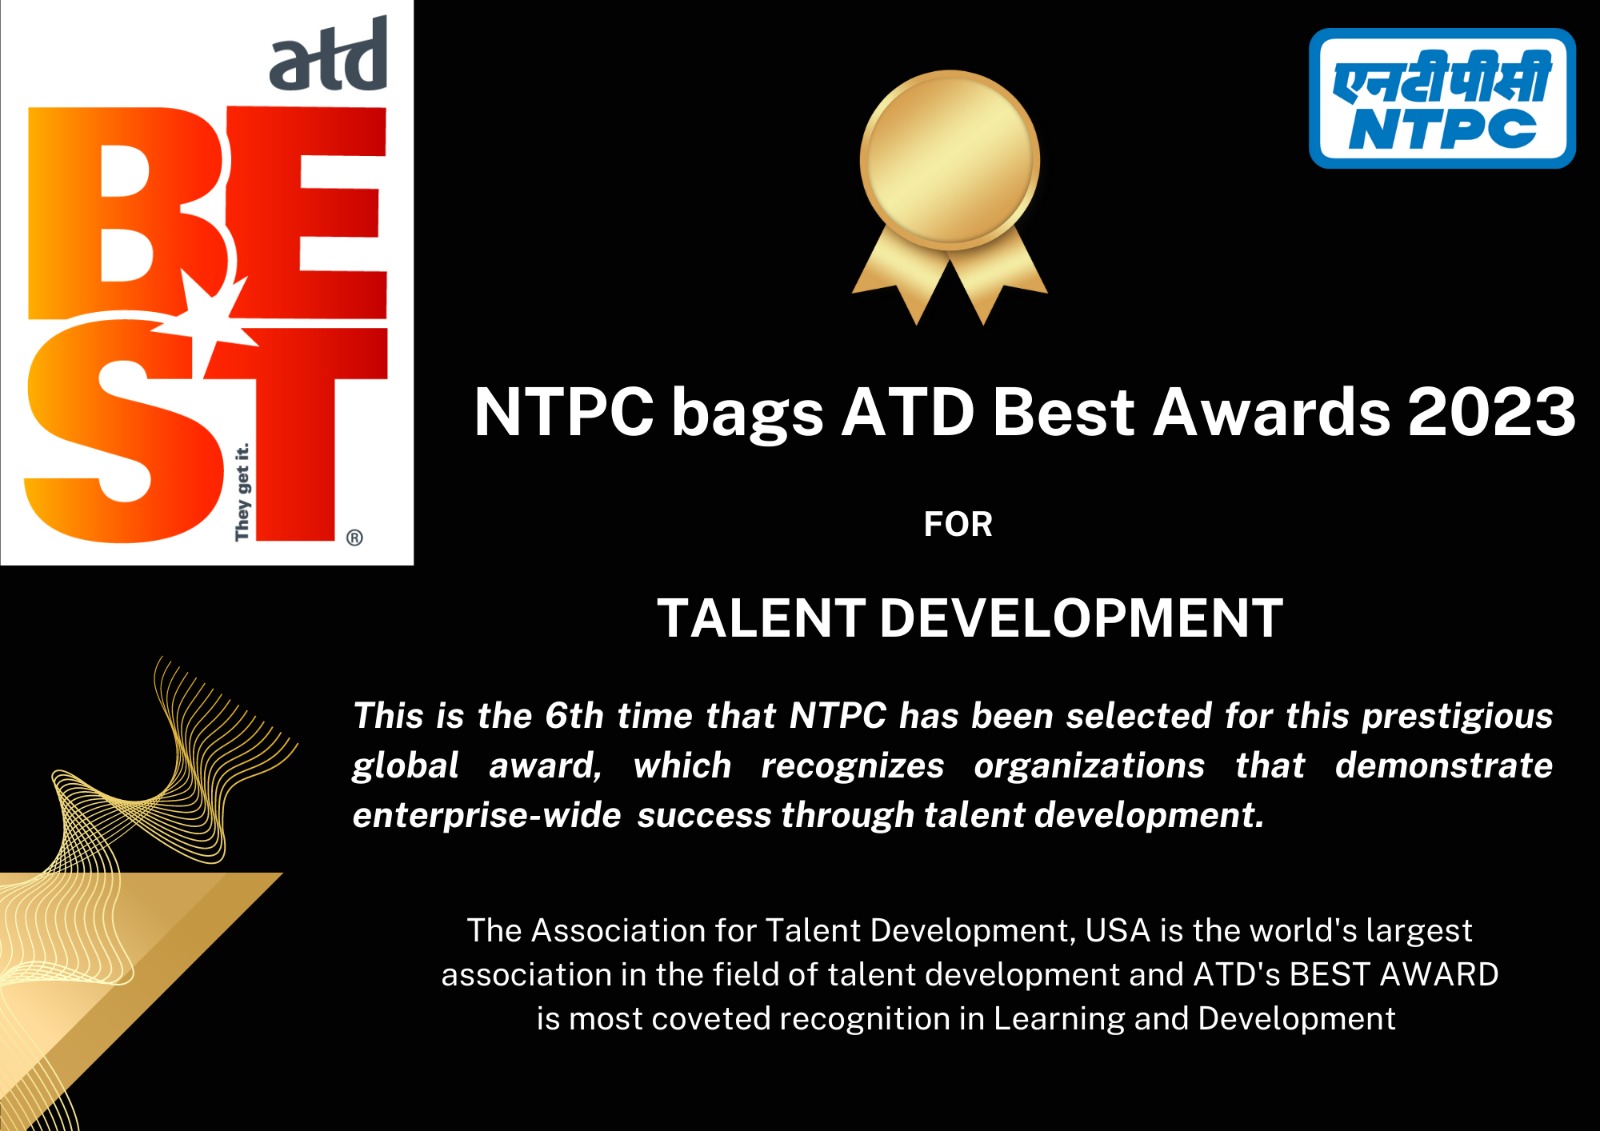 NTPC bags ATD Best Awards 2023 for 6th Time